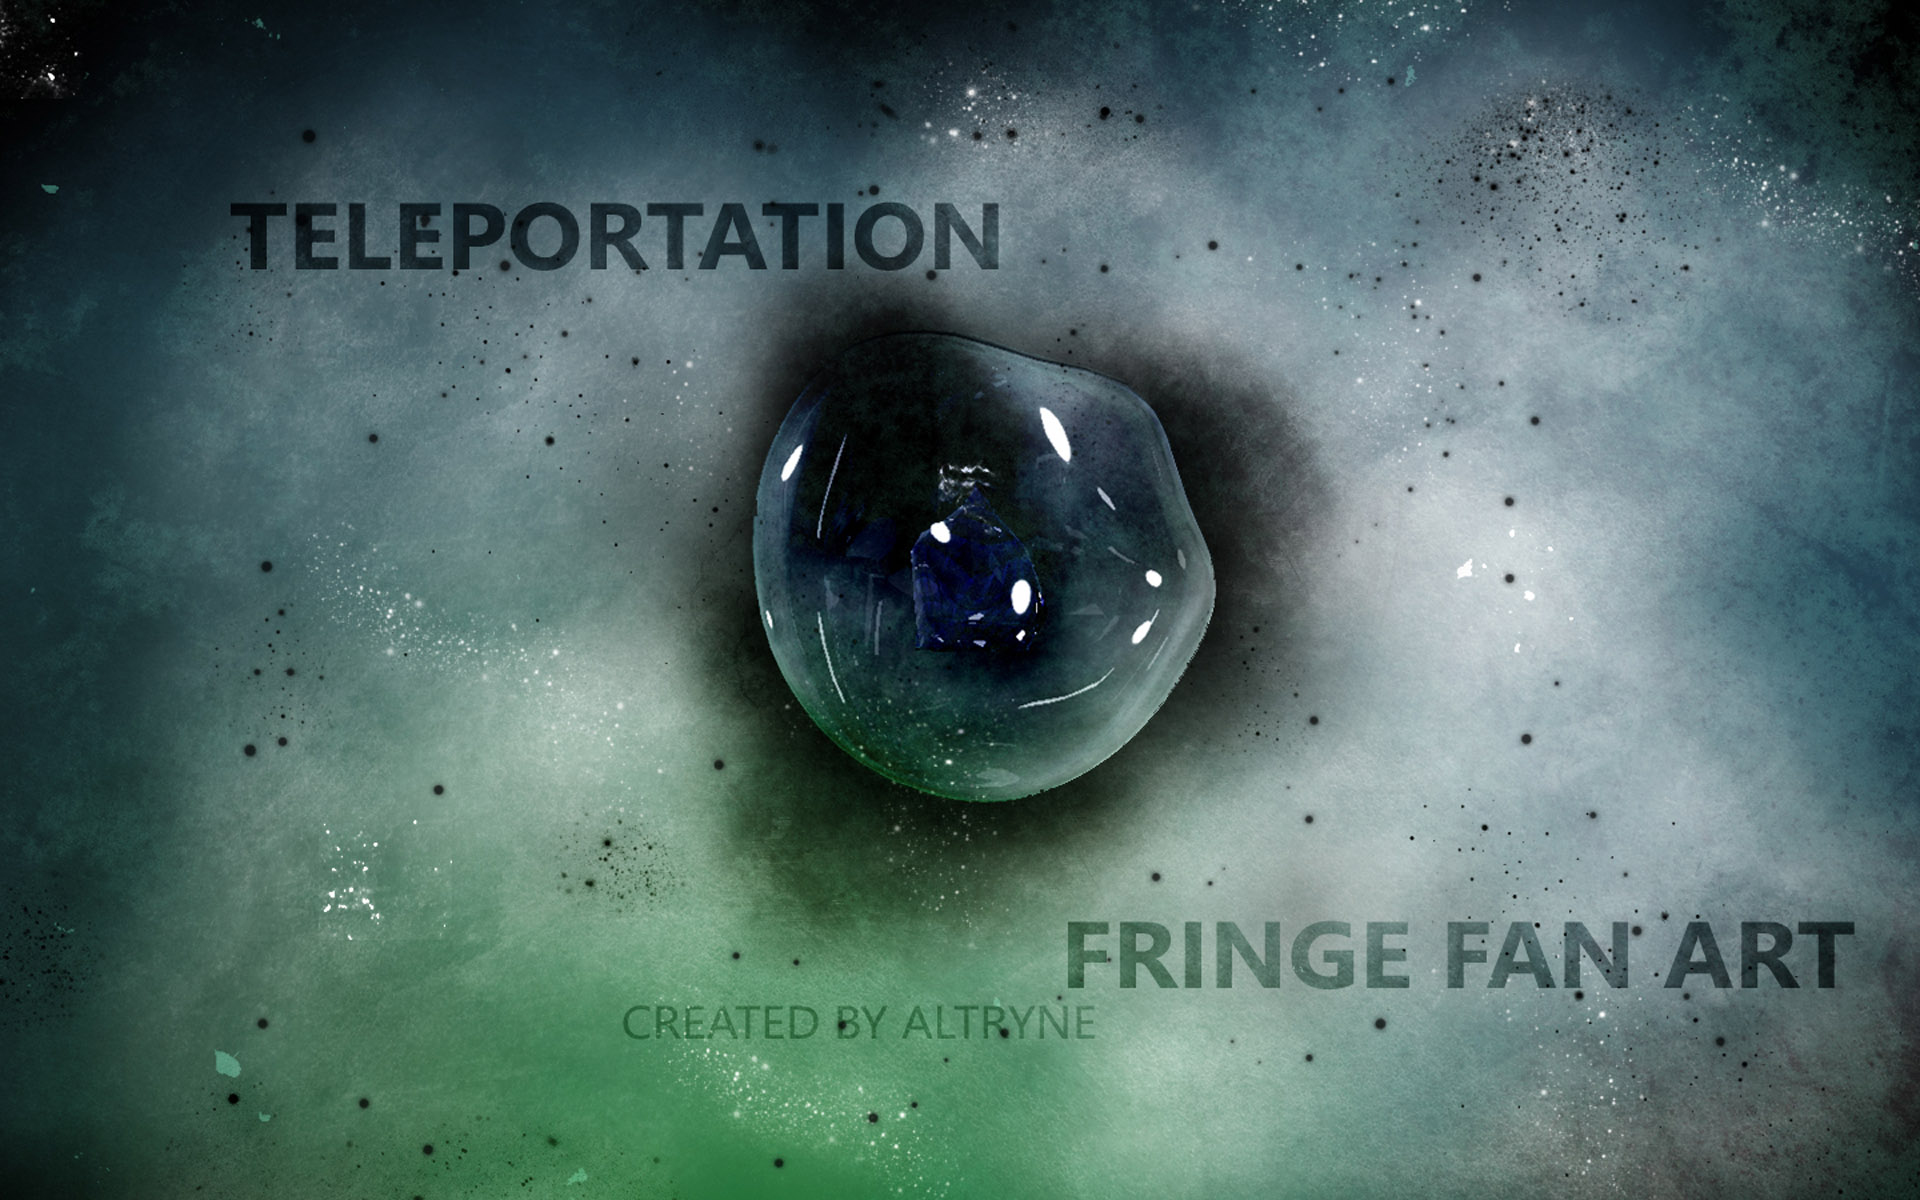 Fringe Wallpaper 1920x1200 Wallpapers 1920x1200 Wallpapers Pictures